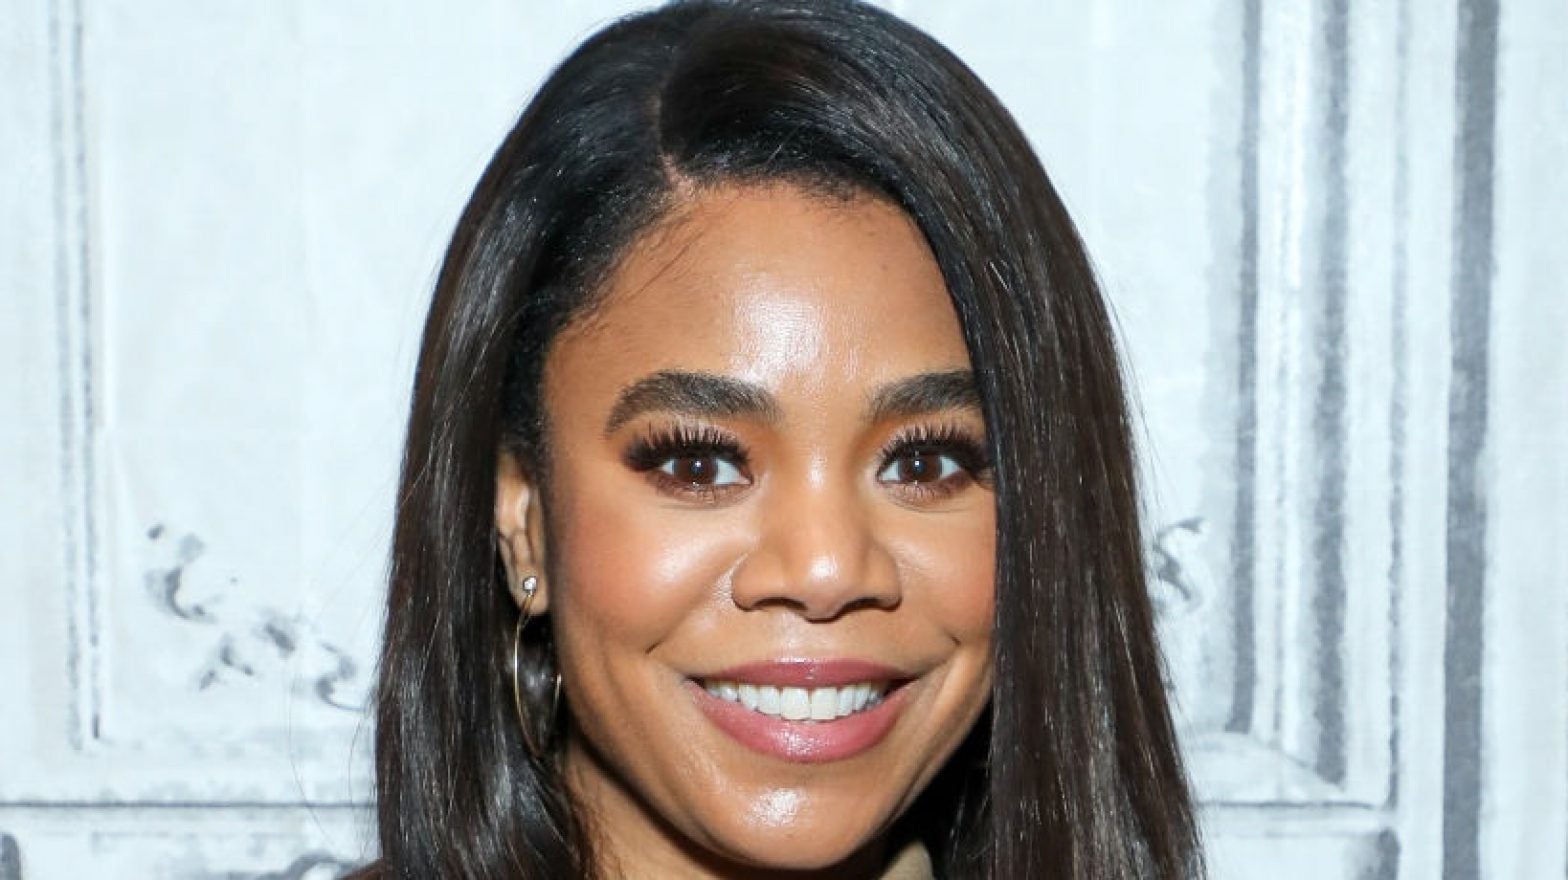 Regina Hall On Claims She's Underrated: 'What Else Could I Want?'